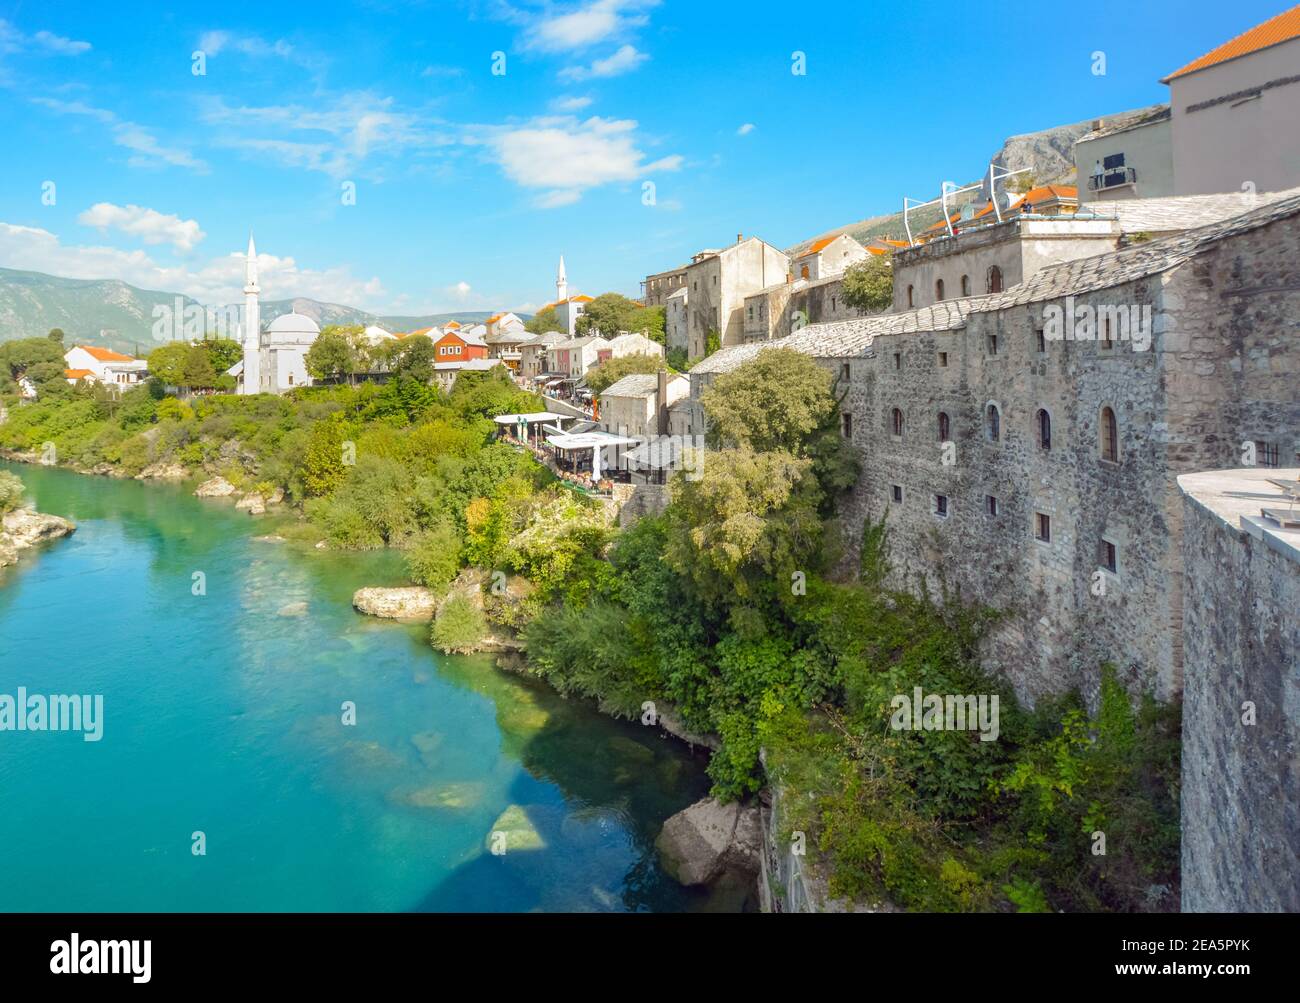 The river Neretva flows by the ancient wall surrounding the old town and village of Mostar, Bosnia and Herzegovina. Stock Photo